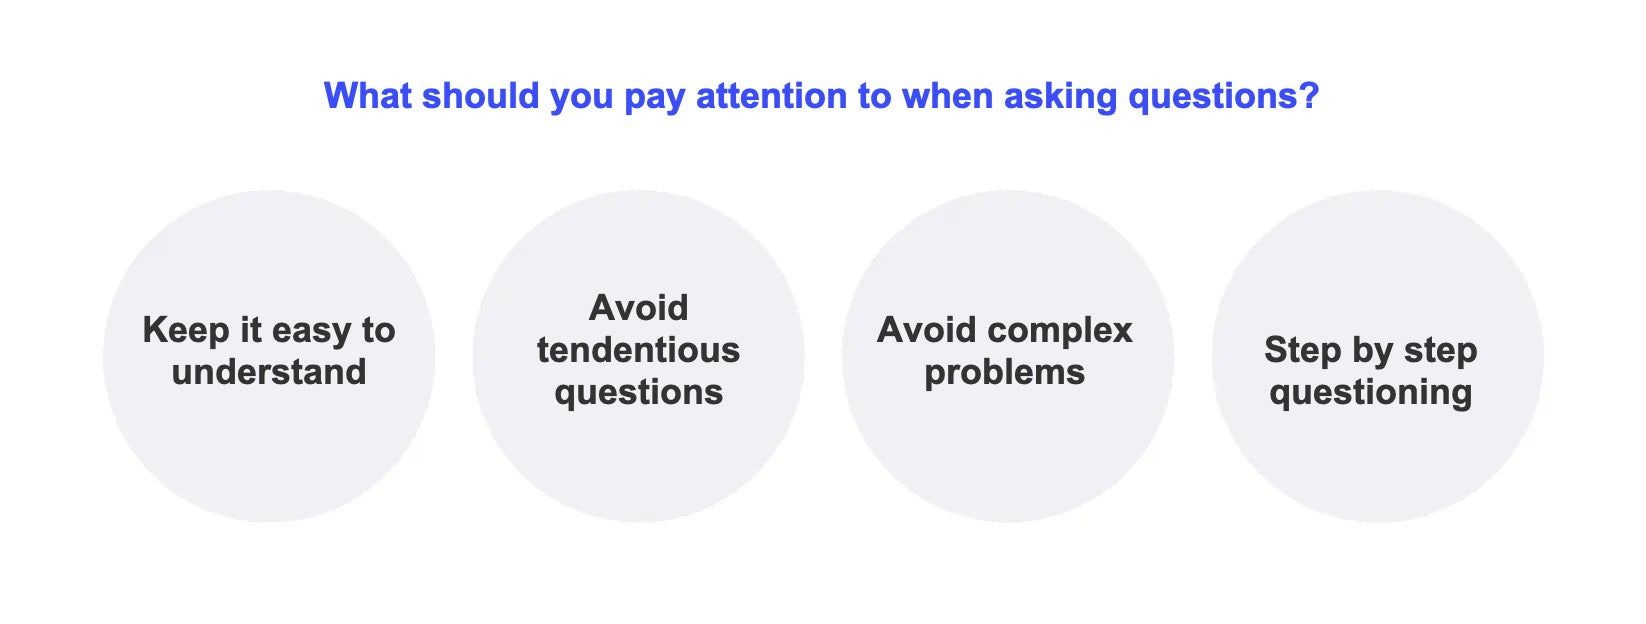 What should you pay attention to when asking questions?